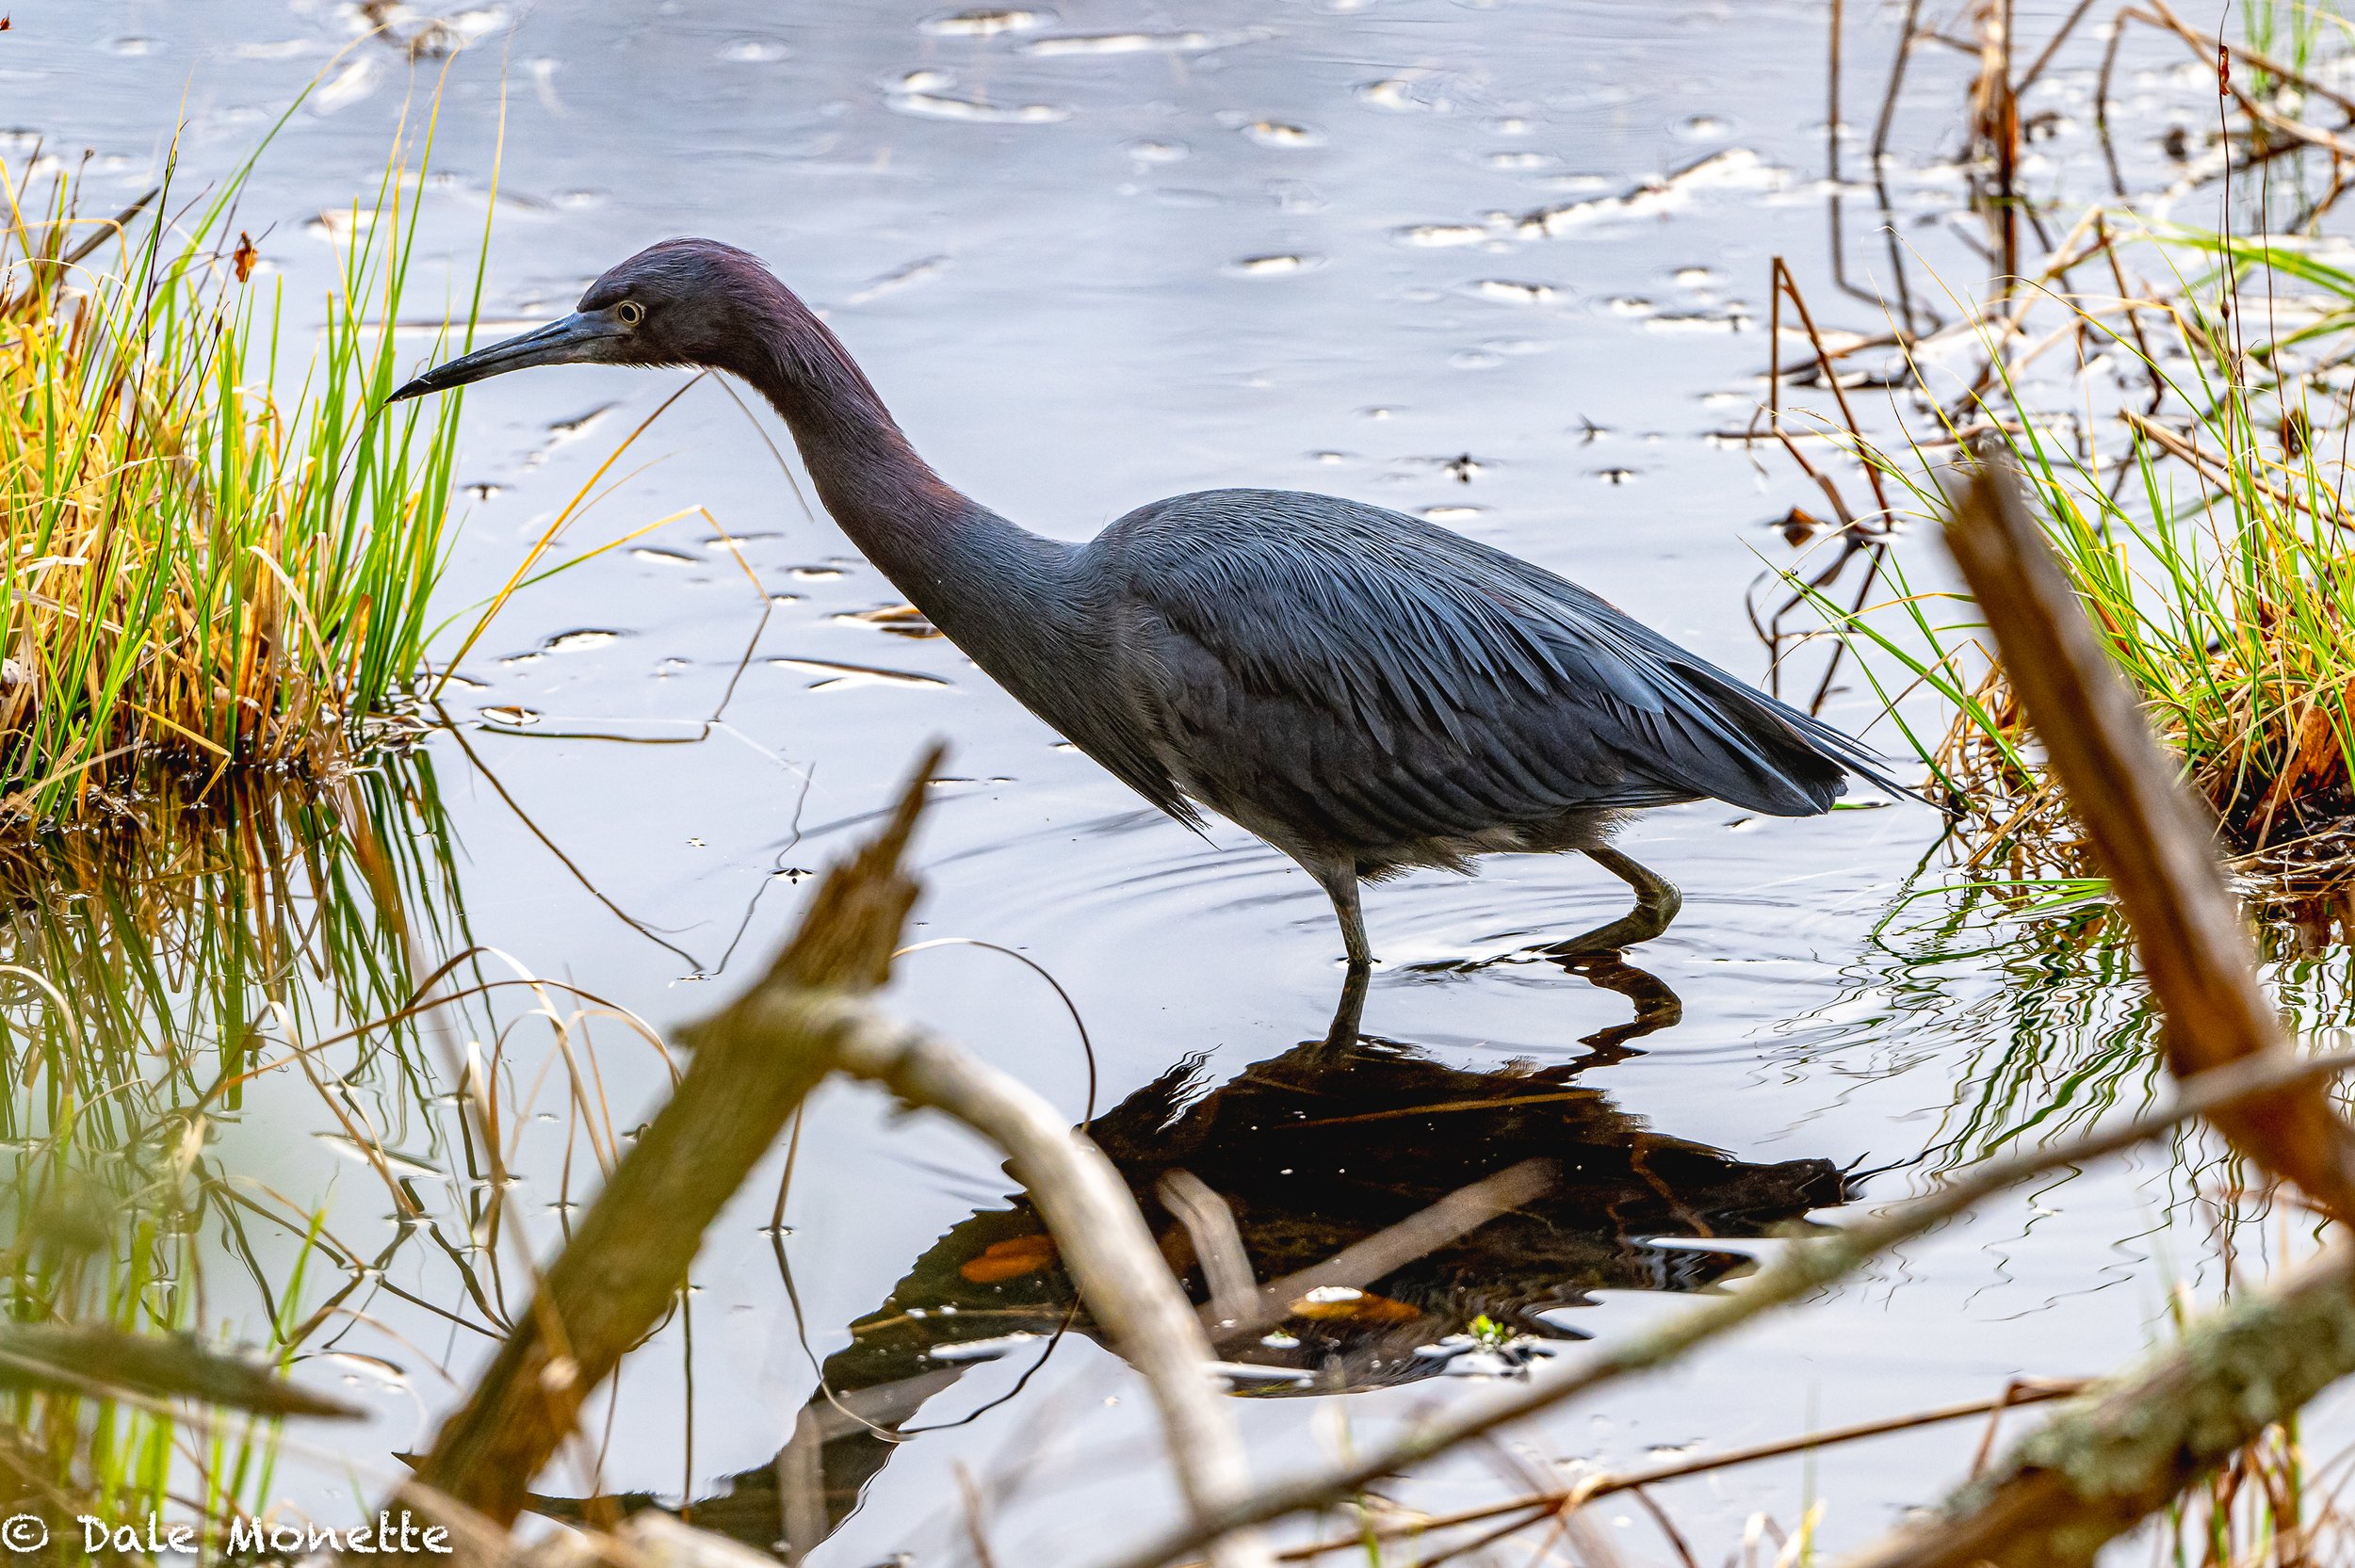   A great find!  A little blue heron,  quite rare in western Massachusetts was found in Northfield.  So I went up and found it in about 20 minutes. What a great colored bird. A little larger than a green heron.  4/14/22  